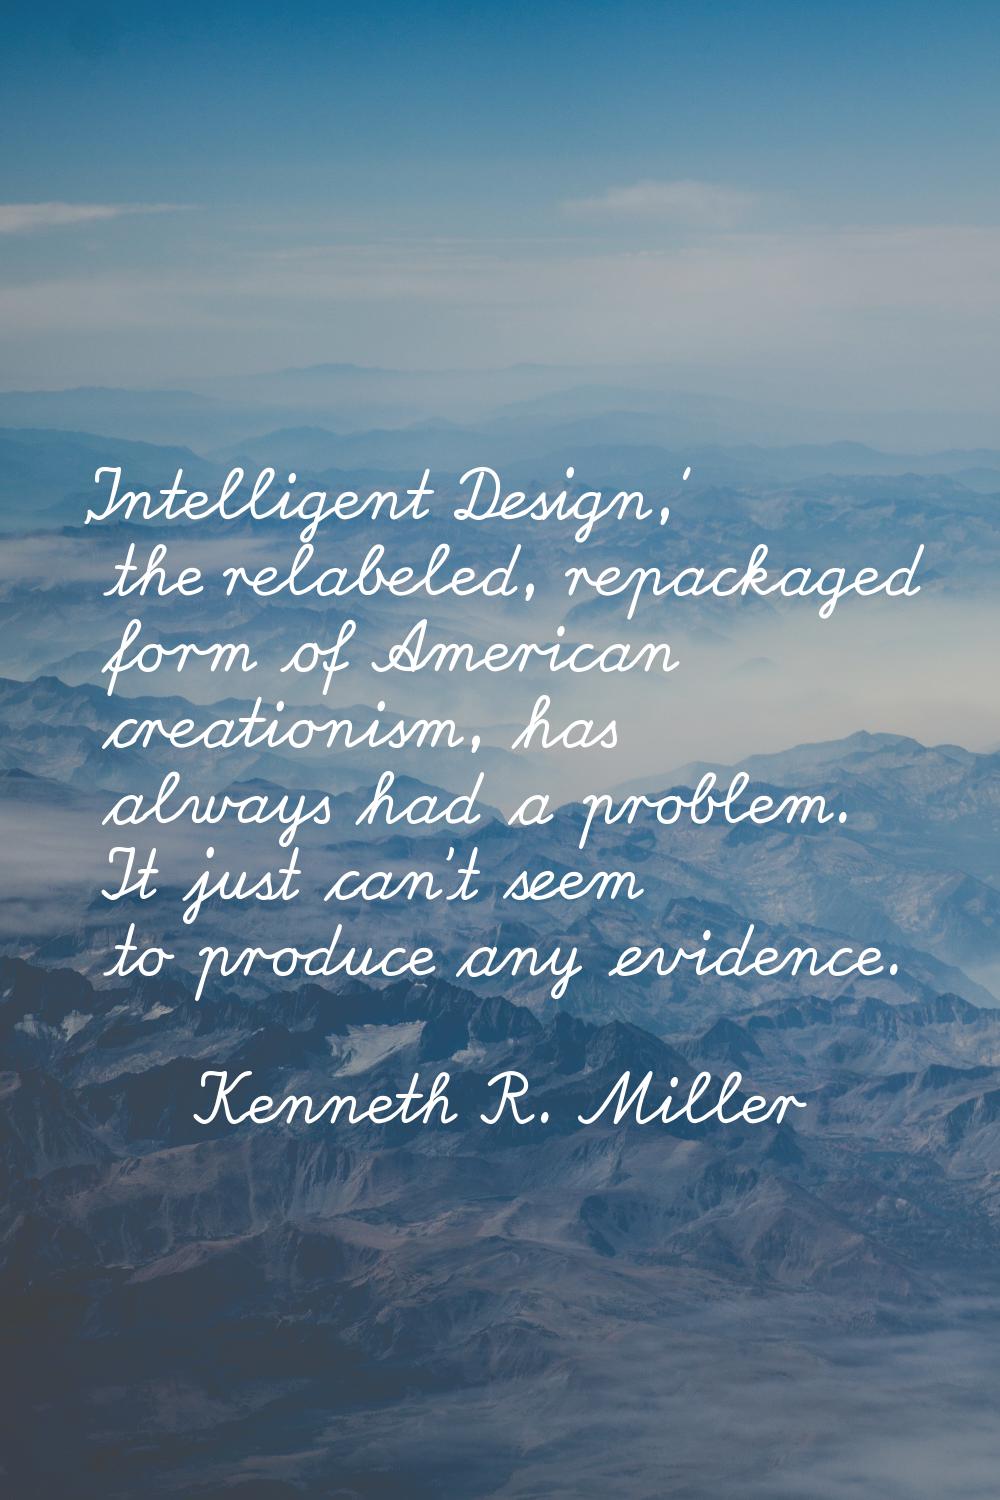 'Intelligent Design,' the relabeled, repackaged form of American creationism, has always had a prob